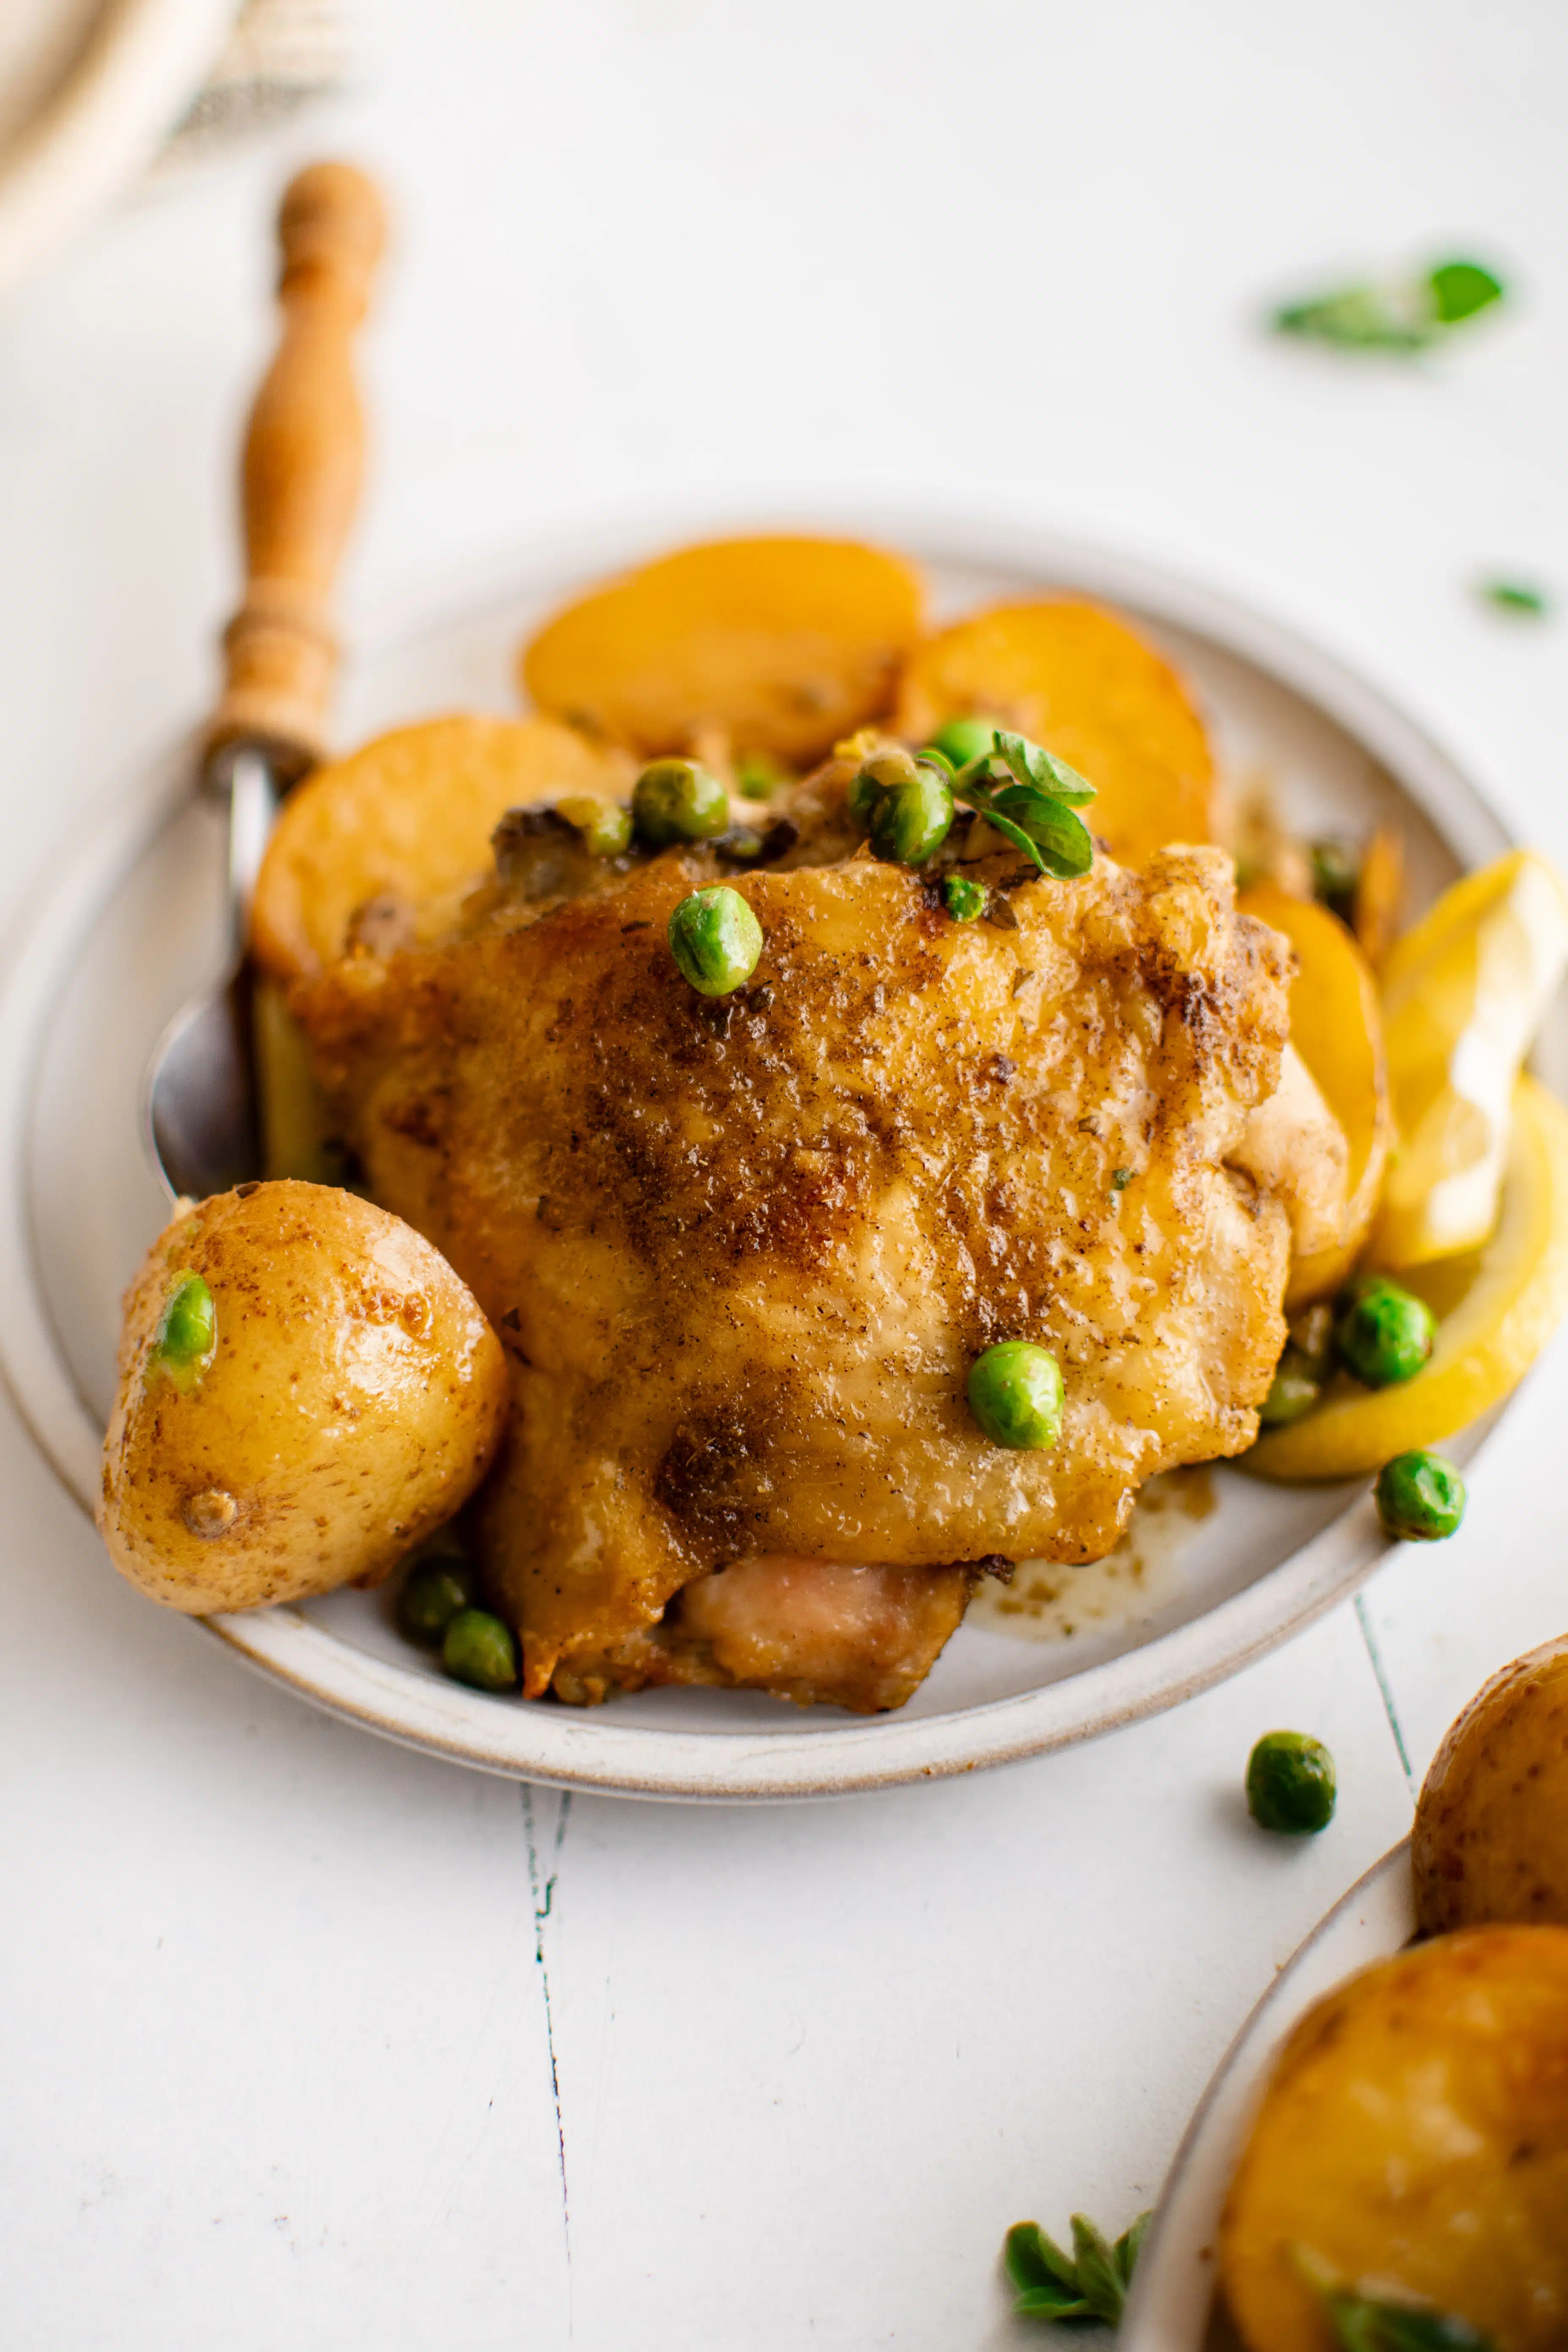 Small white dinner plate filled with a seared and oven-roasted chicken thigh, halved potatoes, and green peas drizzled with a fresh lemon garlic and white wine sauce.